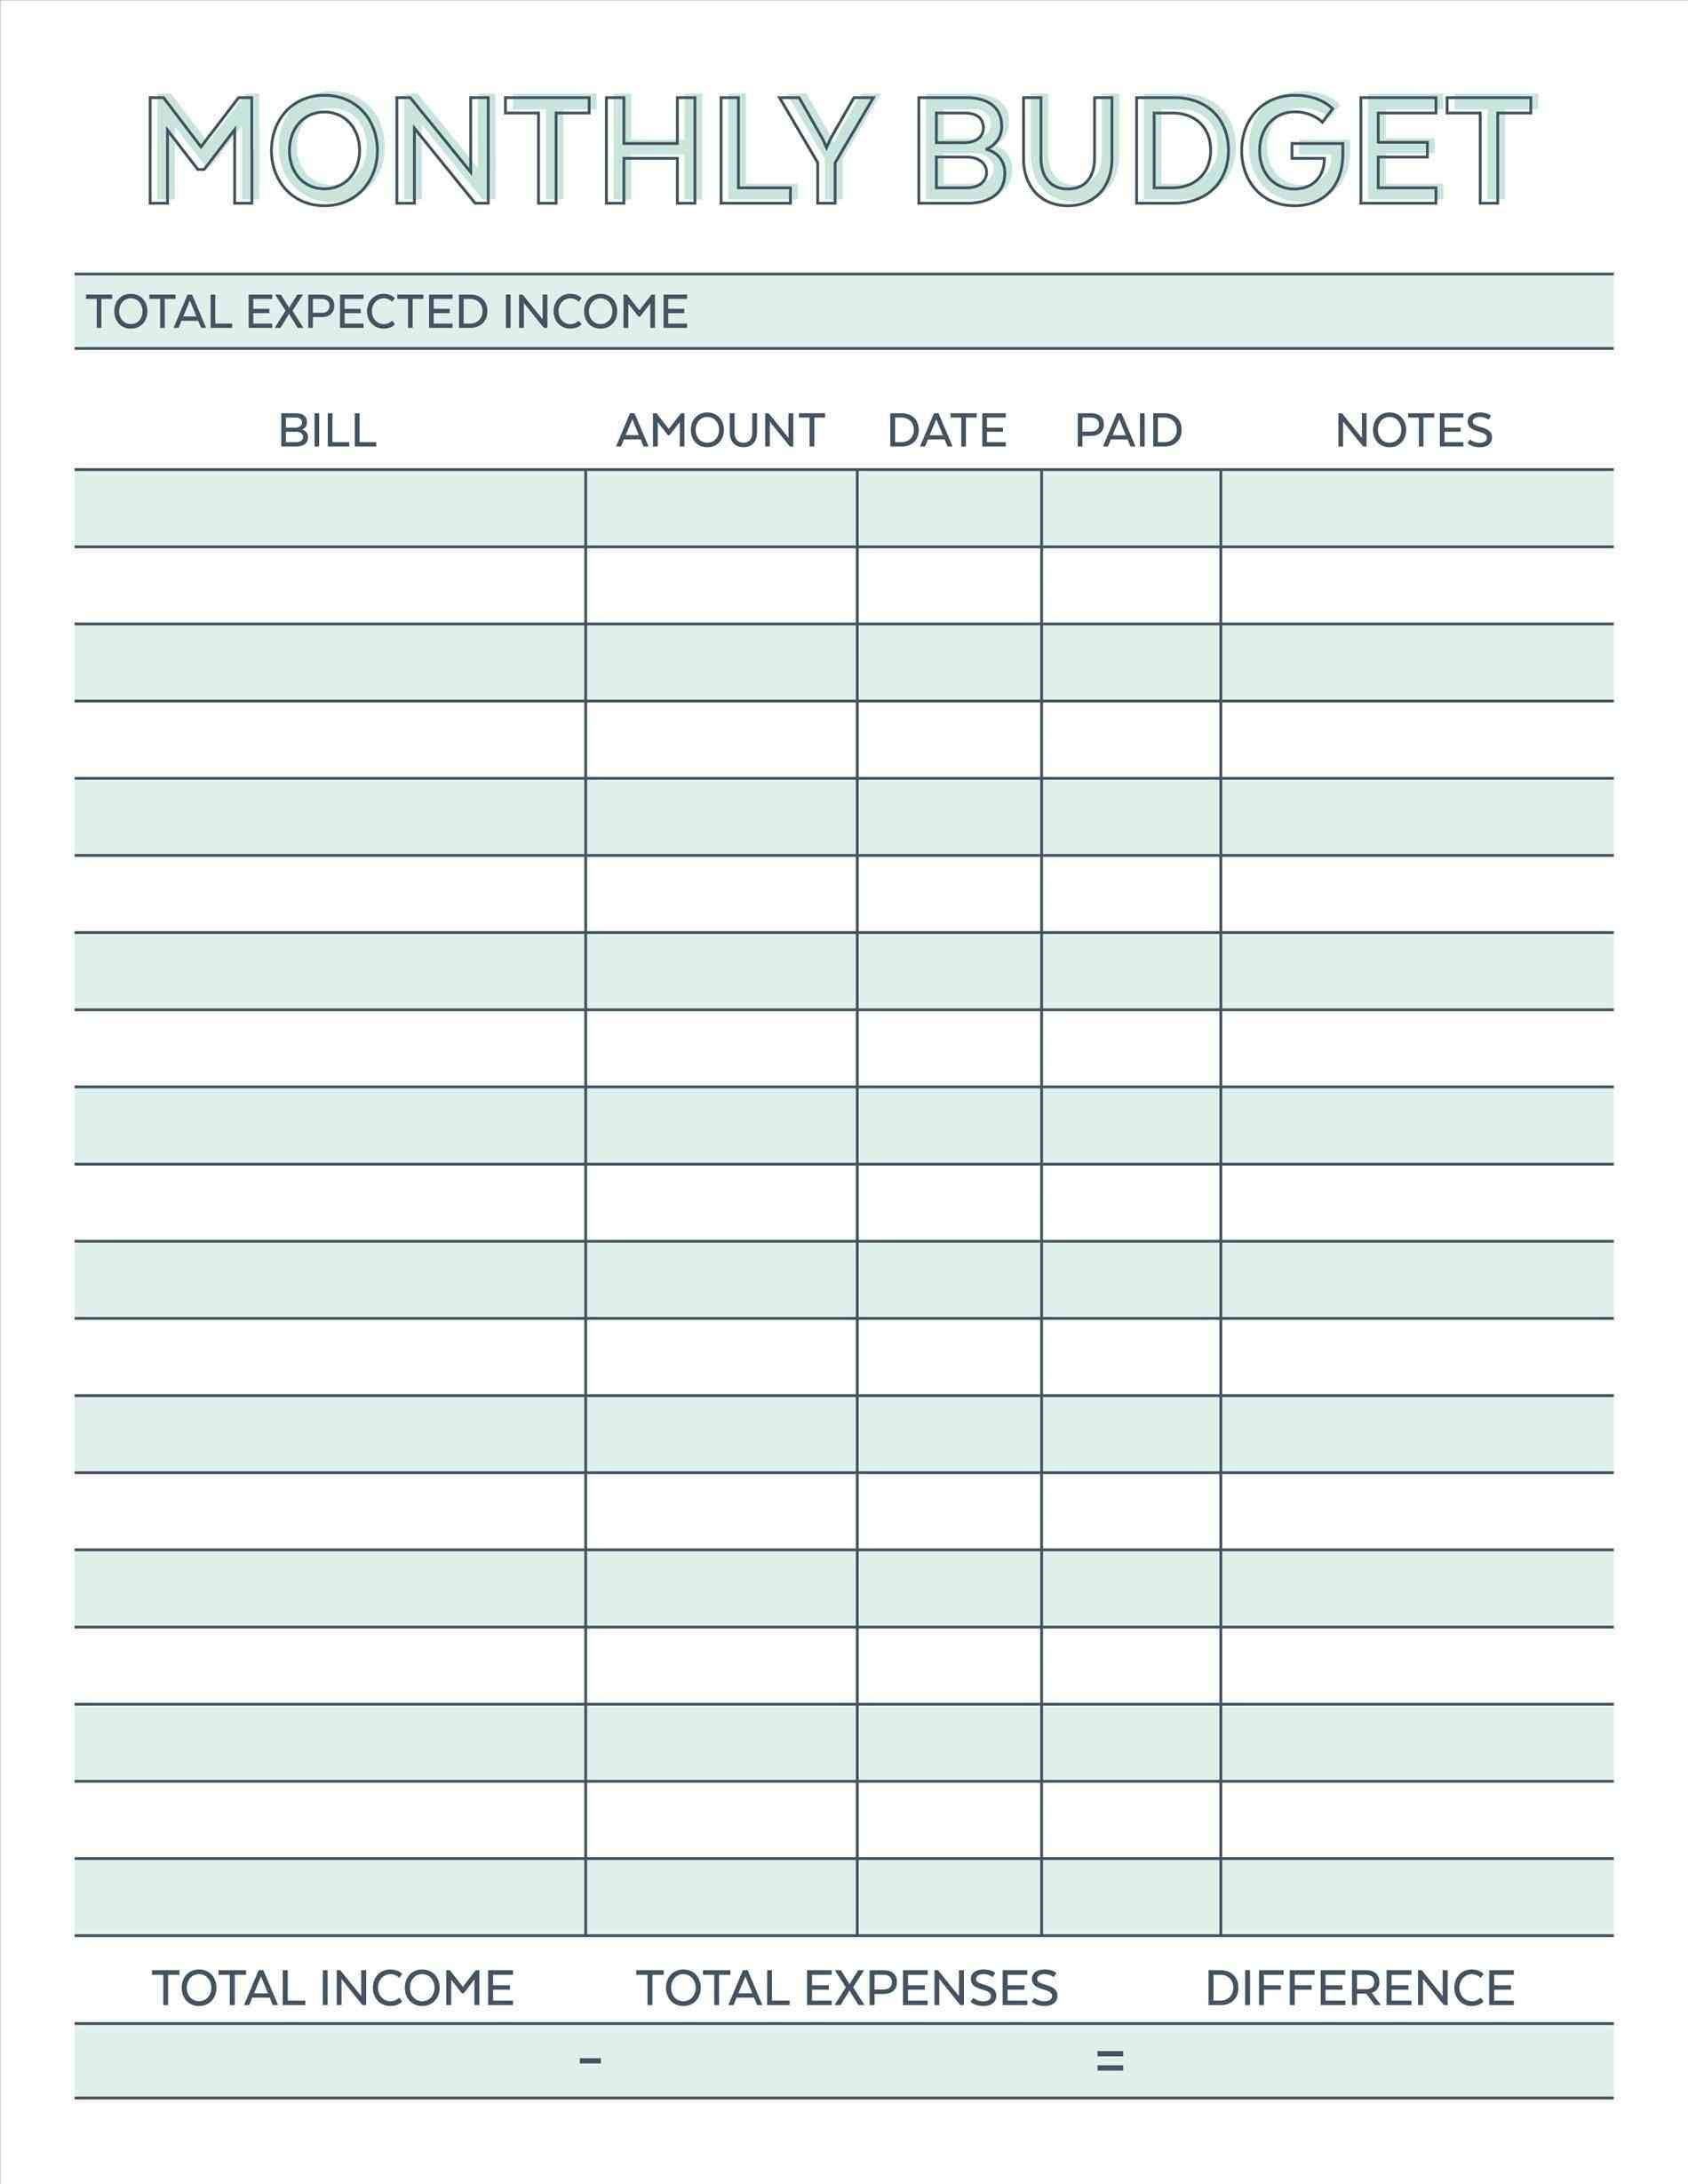 Budget Planner Planner Worksheet Monthly Bills Template intended for Yearly Budget Planner Template